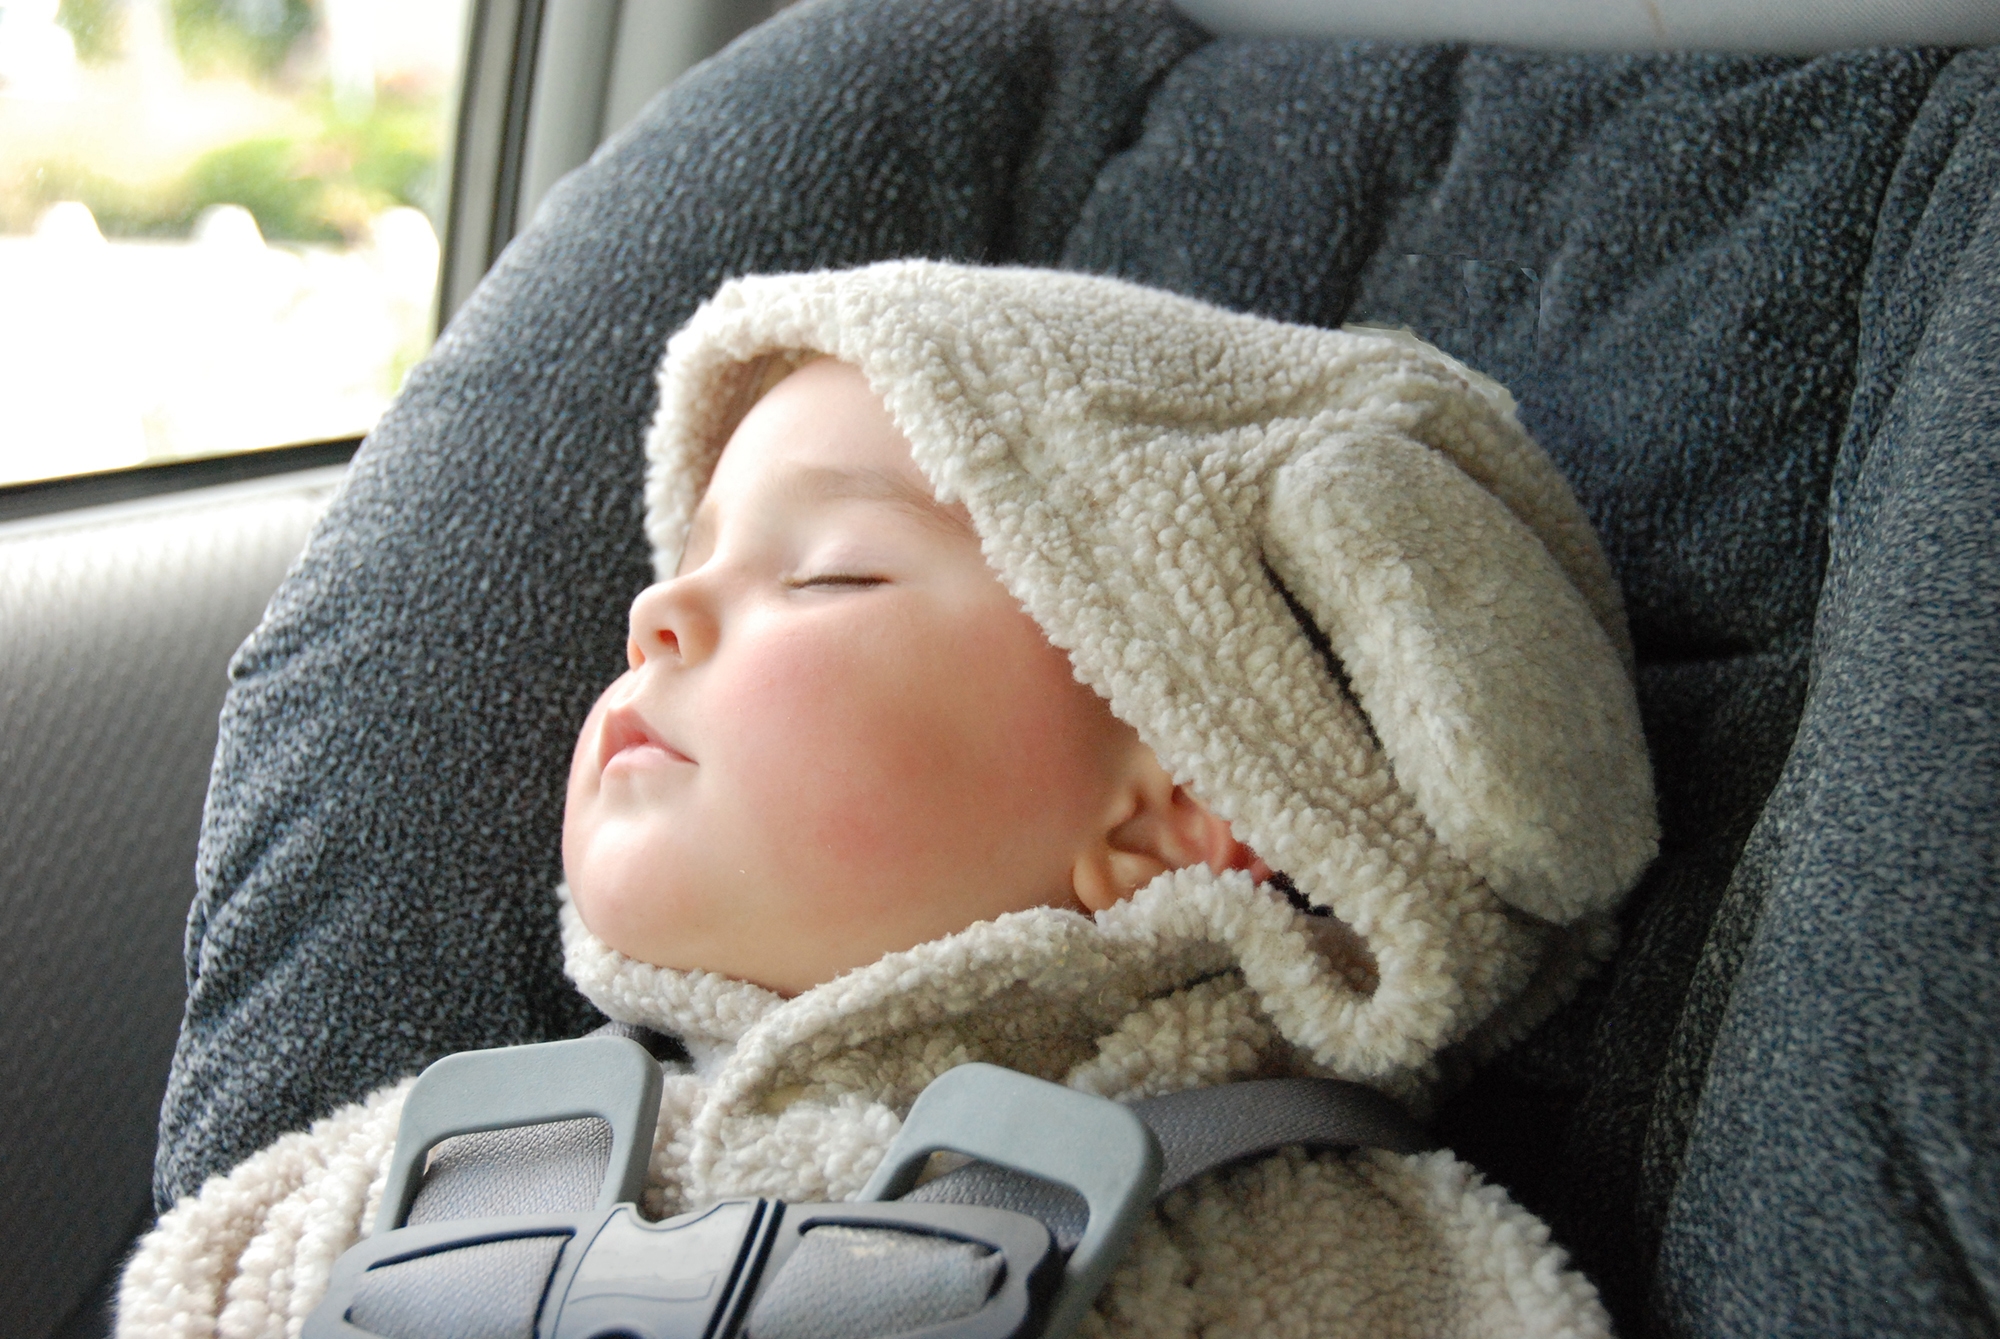 An infant wearing a hooded top with ears has fallen asleep in the carseat